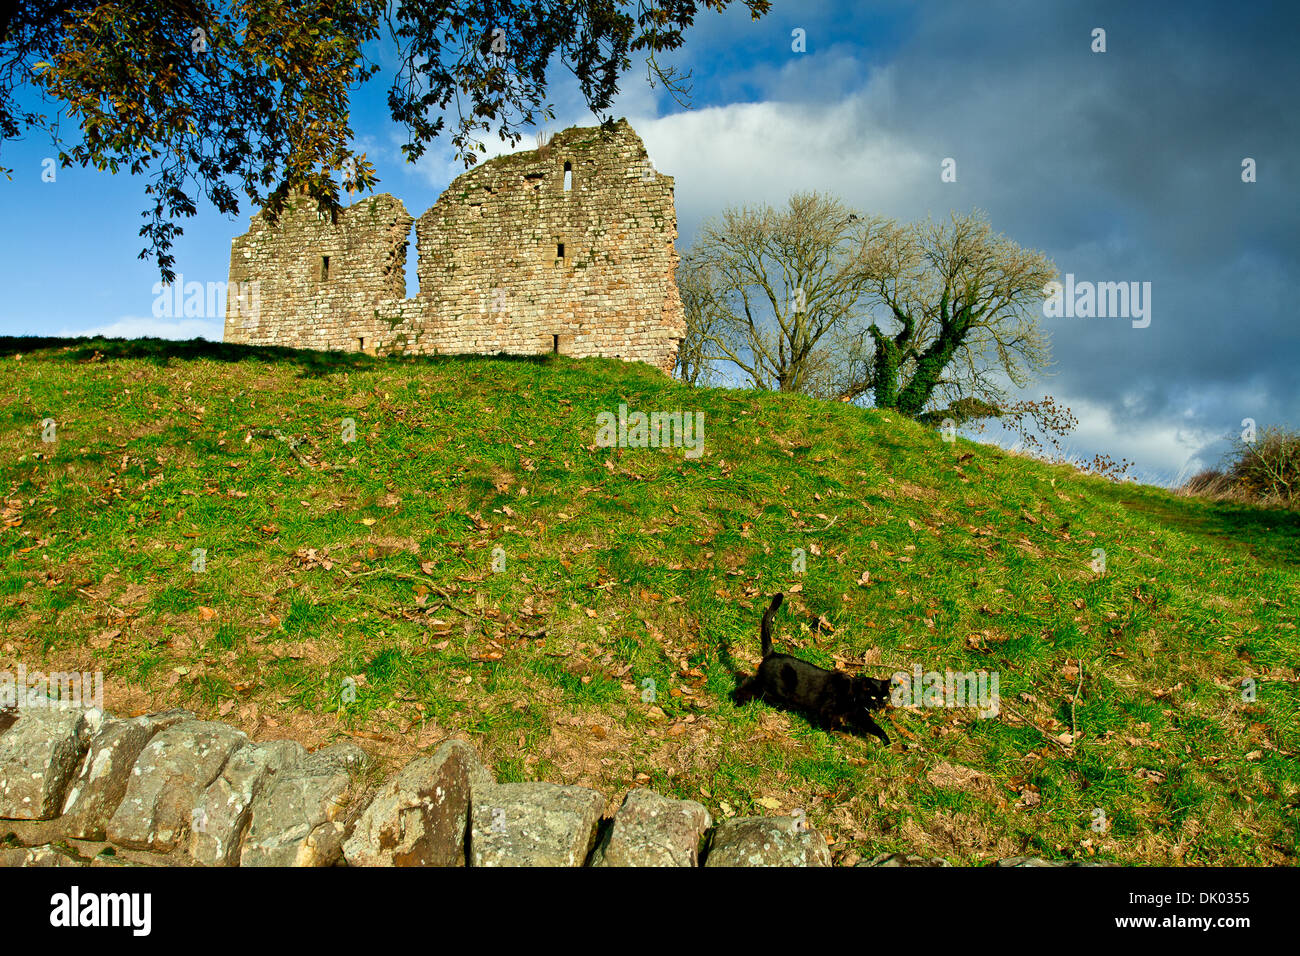 Thirlwall Castle near Greenhead in Northumberland lies next to Tipalt Burn with a domestic black cat Stock Photo